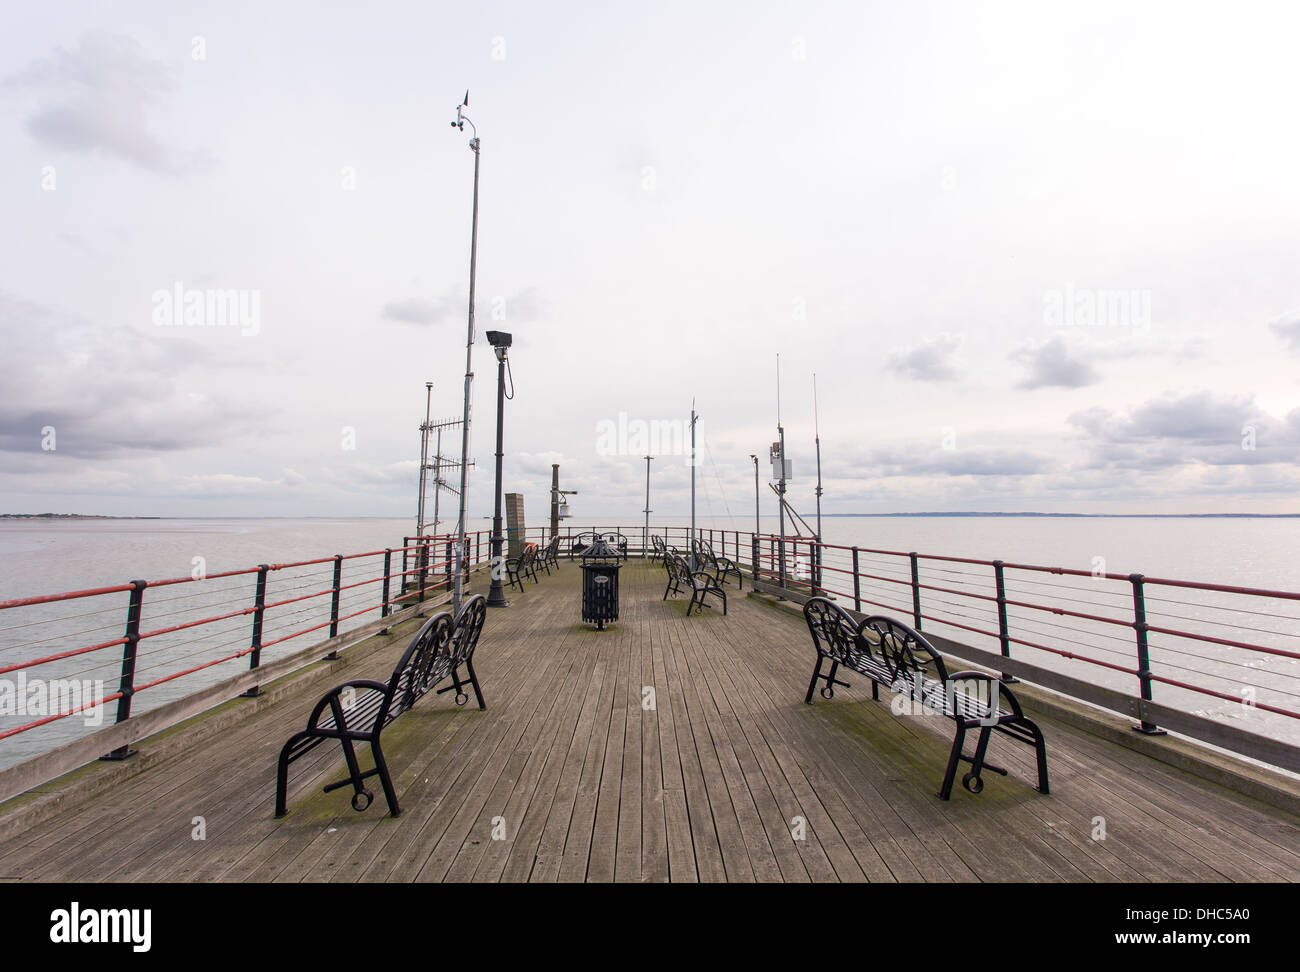 12/10/2013 Communication Ariels on Southend pier. The longest pier in the World measuring 1.33 miles into the Thames river. Stock Photo